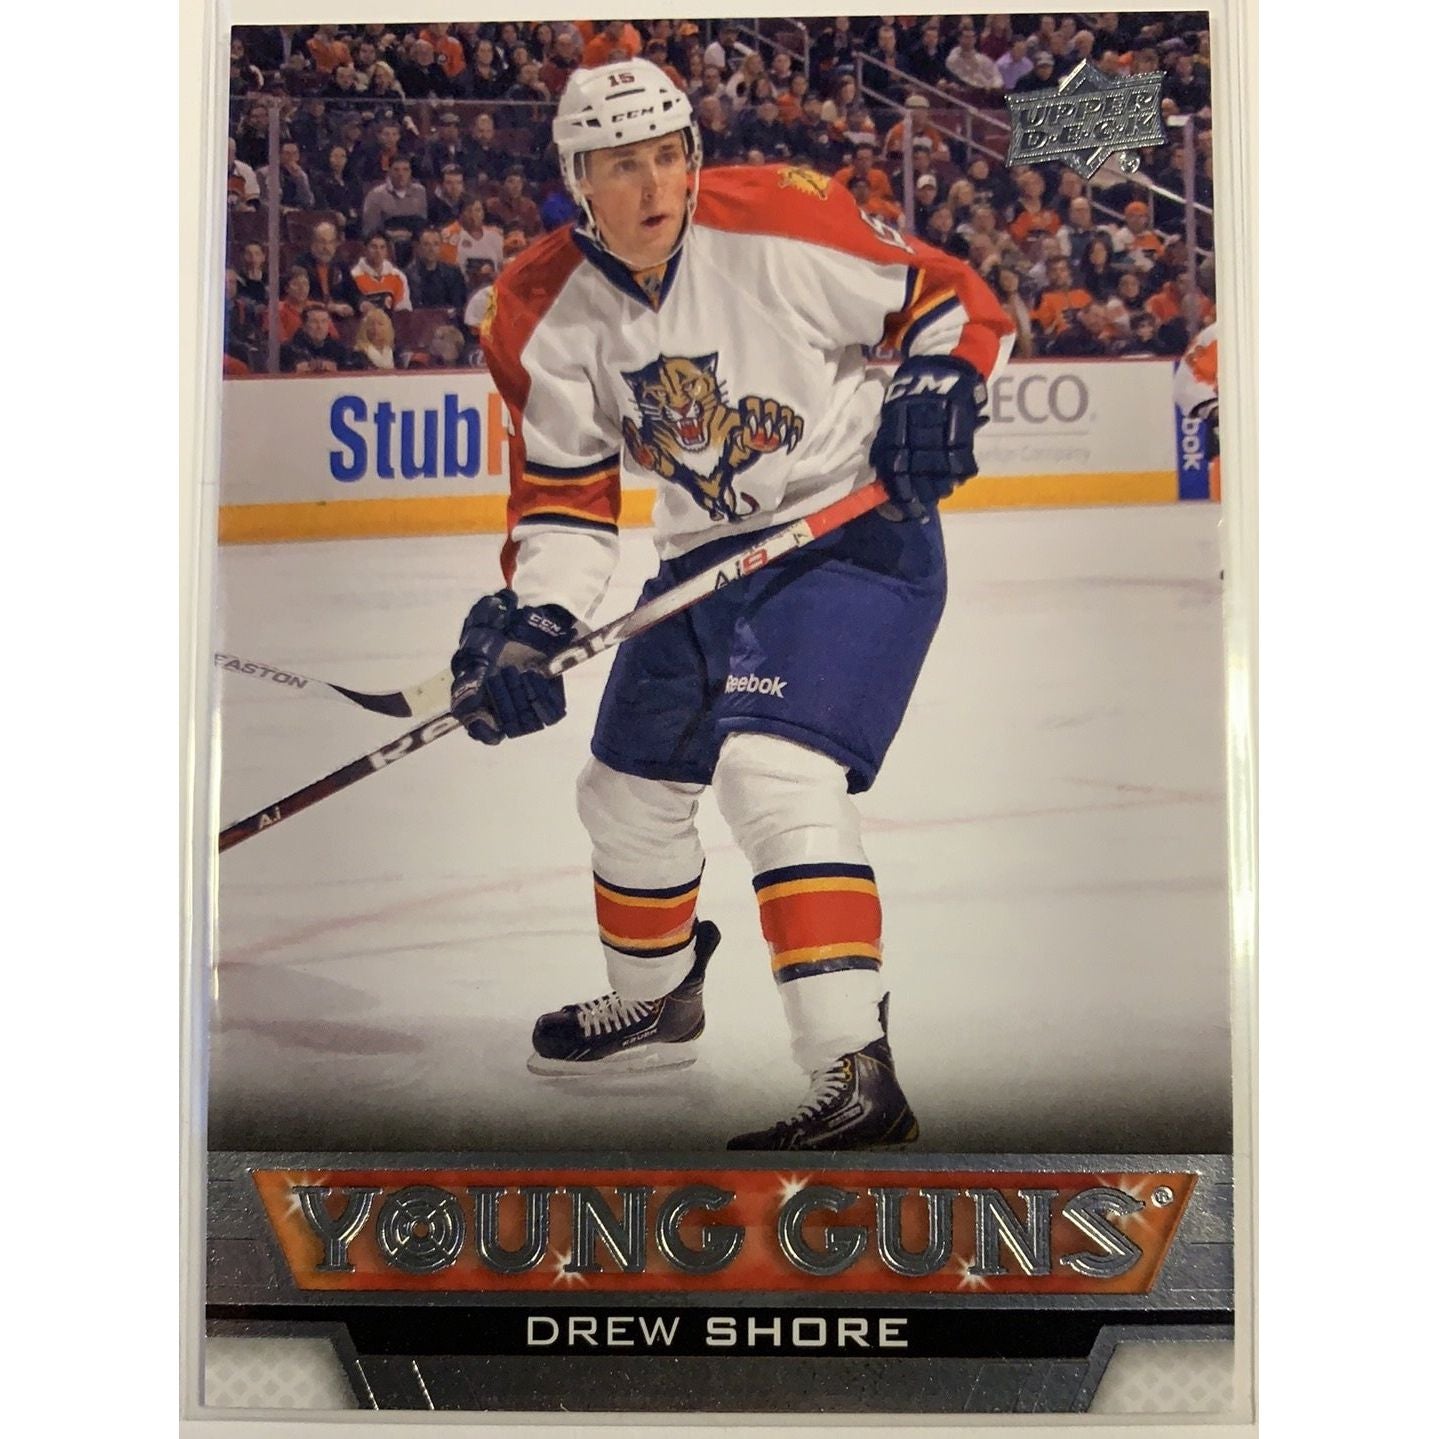  2013-14 Upper Deck Series 1 Drew Shore Young Guns  Local Legends Cards & Collectibles